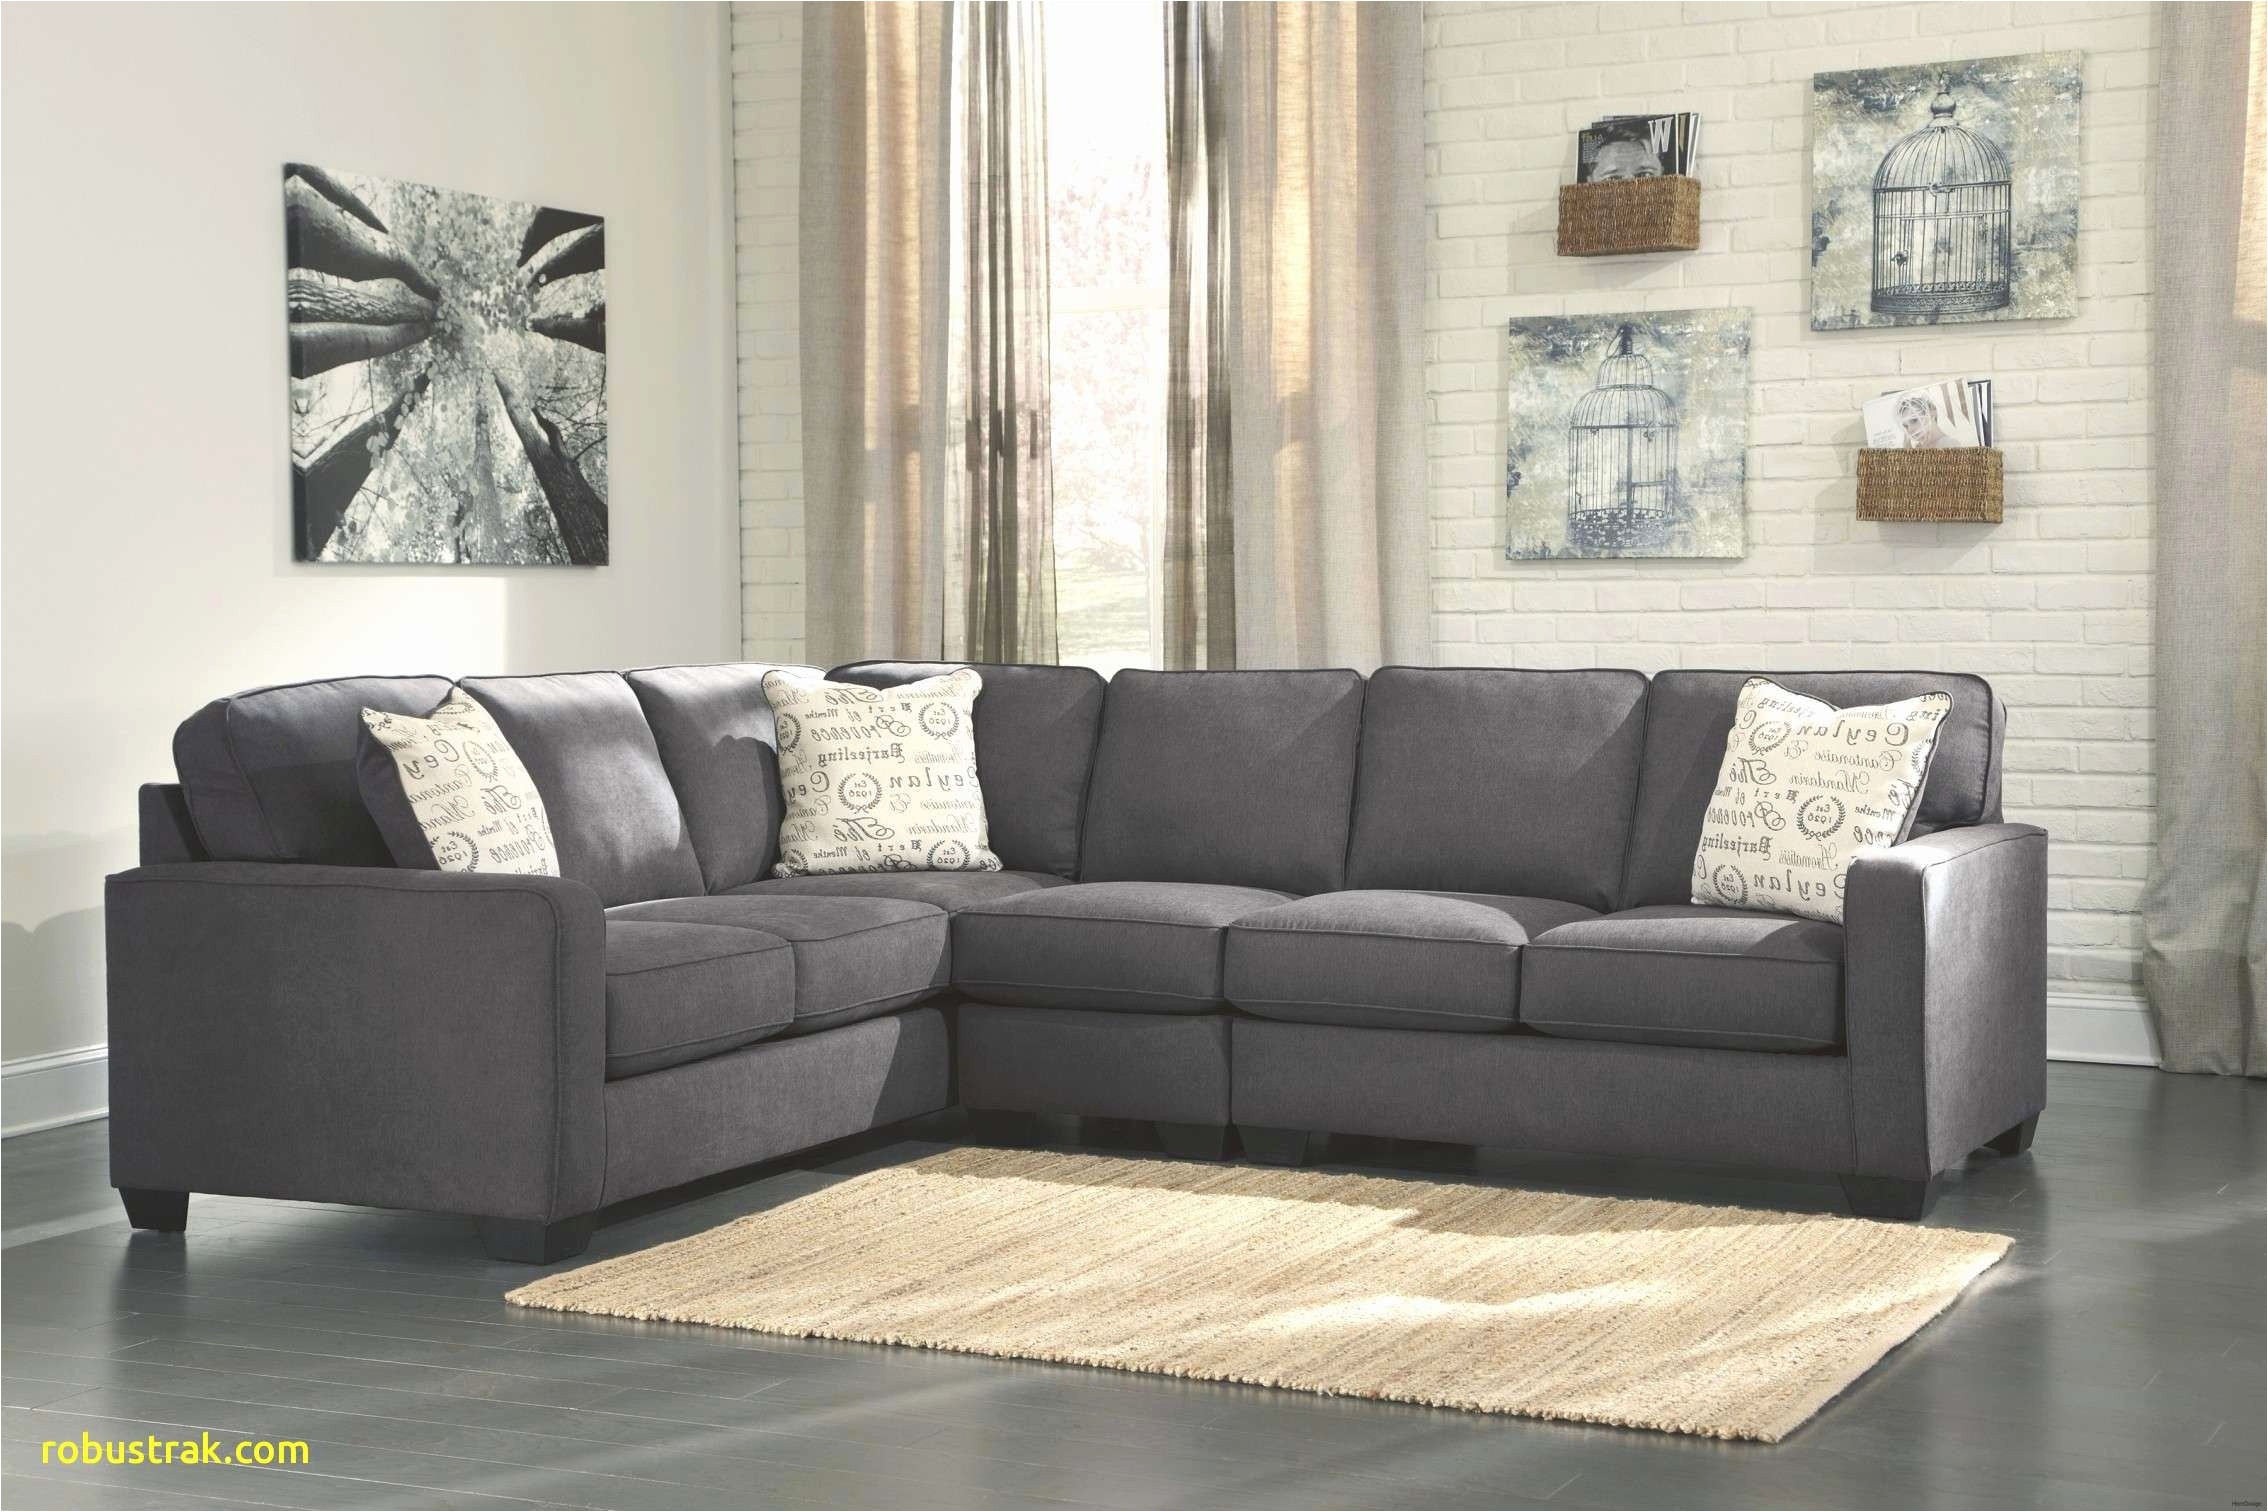 Leather Sectional sofas Modern Impressive 50 Best Mid Century Modern Sectional sofa Pics 50 s